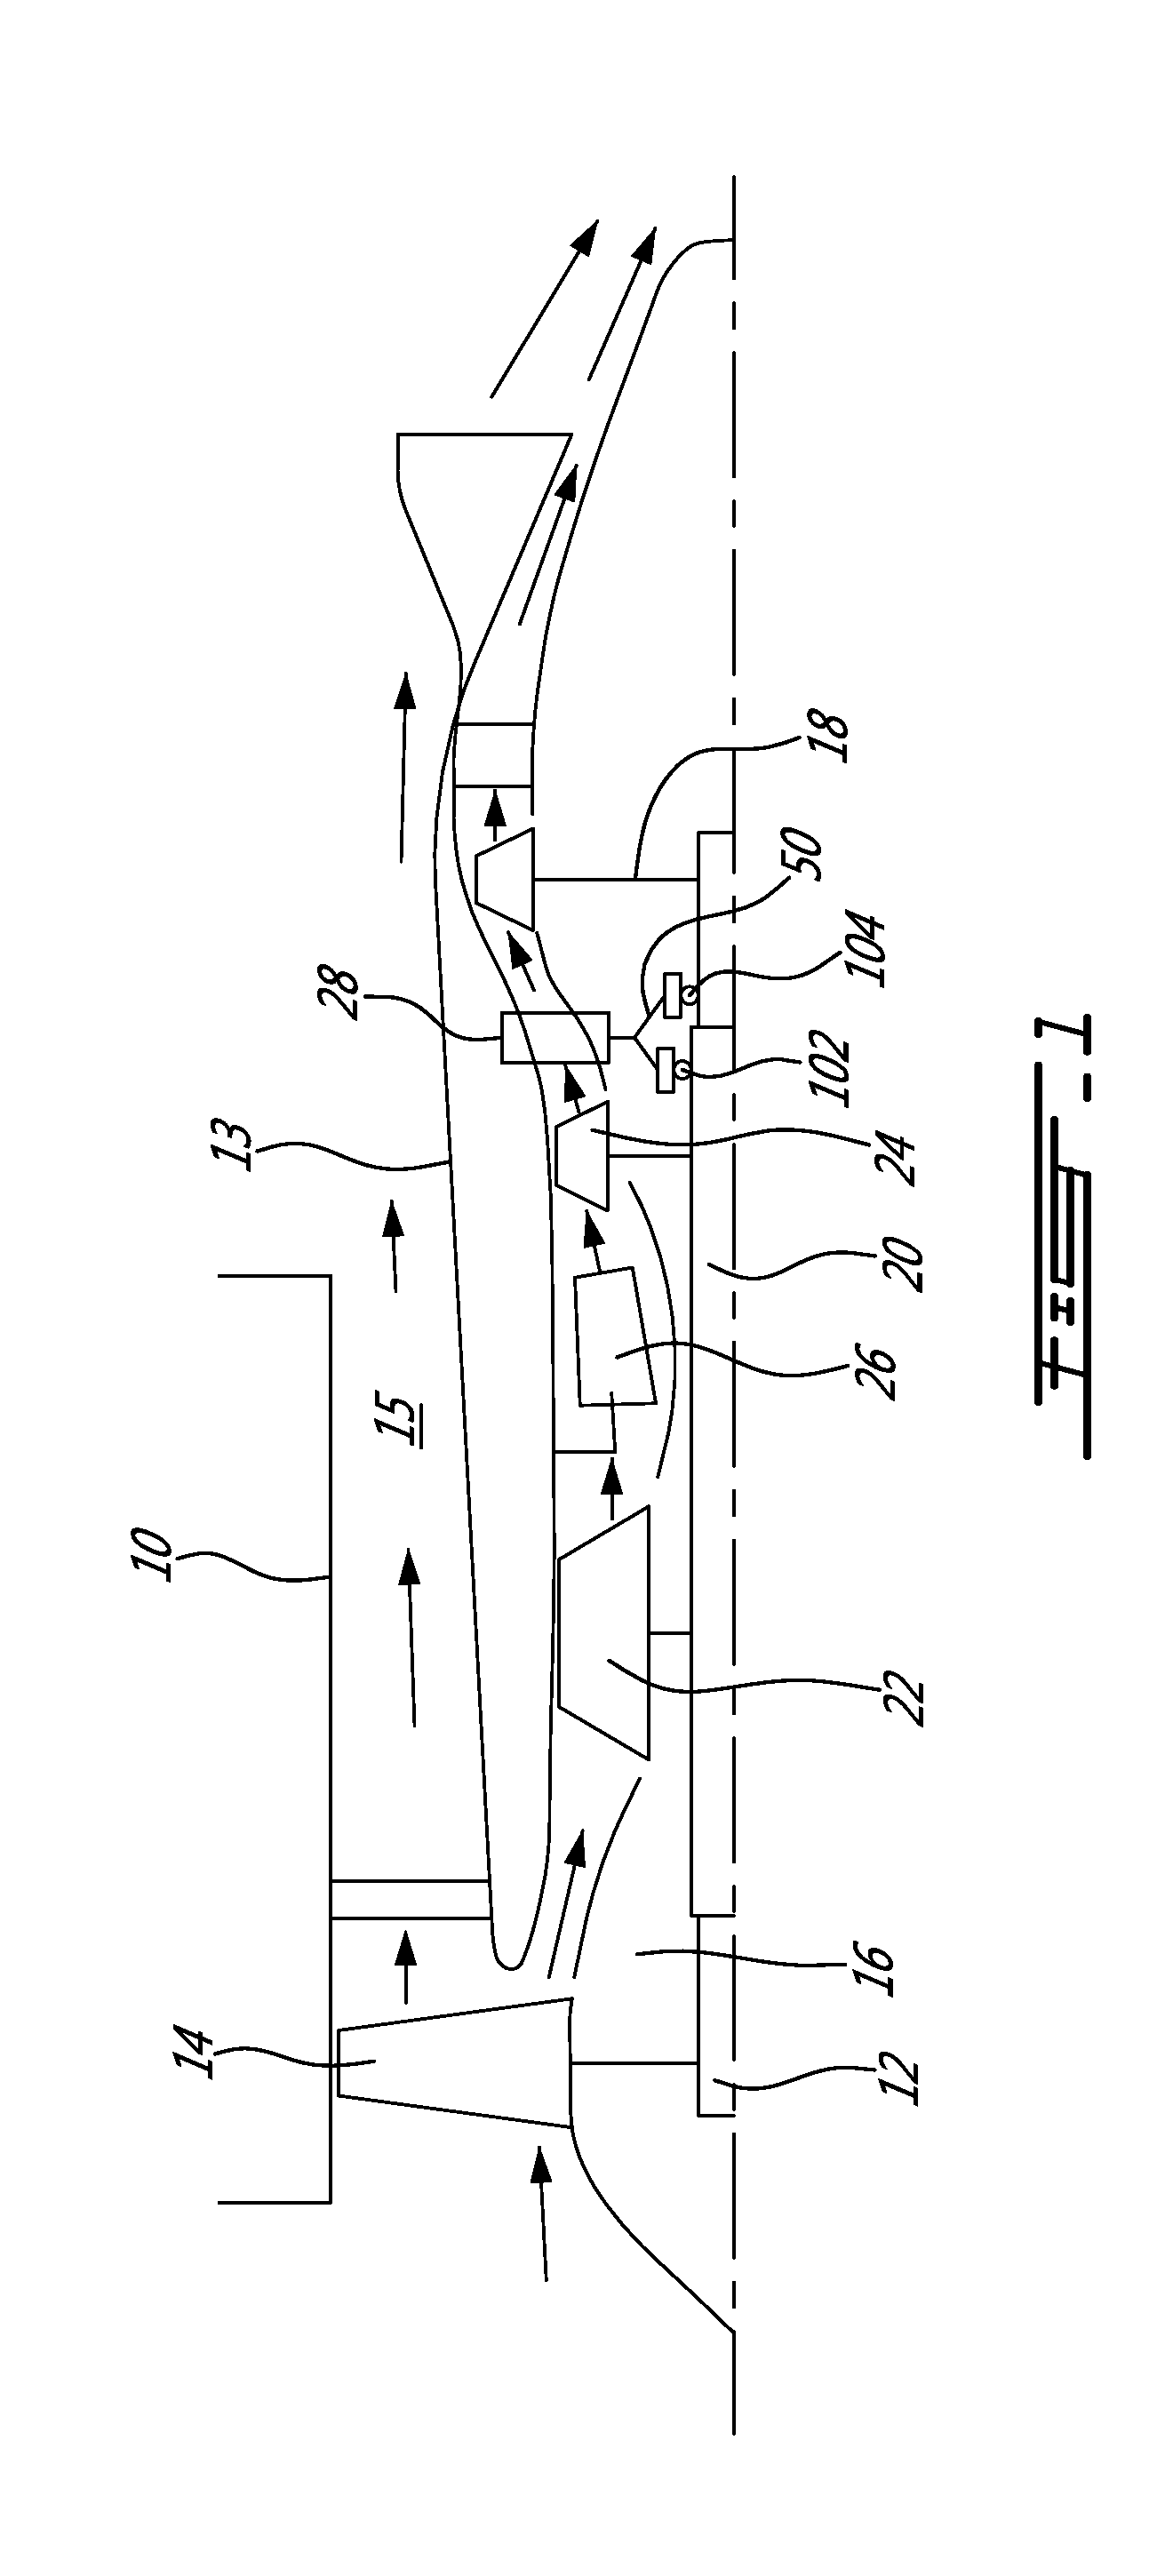 Air system architecture for a mid-turbine frame module